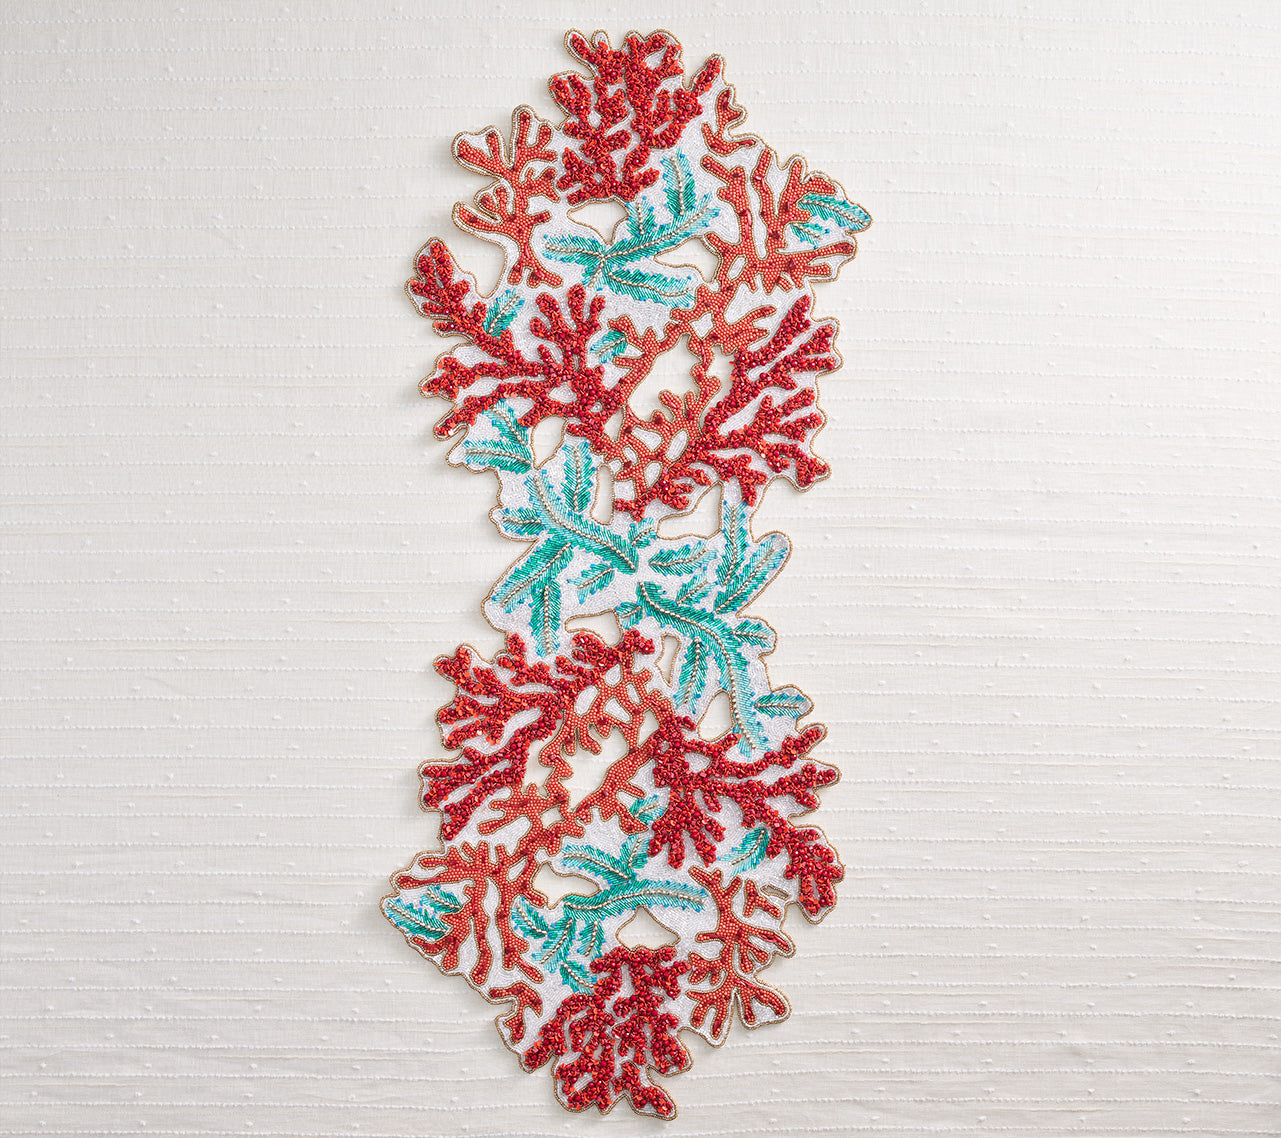 Red and turquoise Coral Spray Table Runner with glass, plastic and chip beads embellishments 